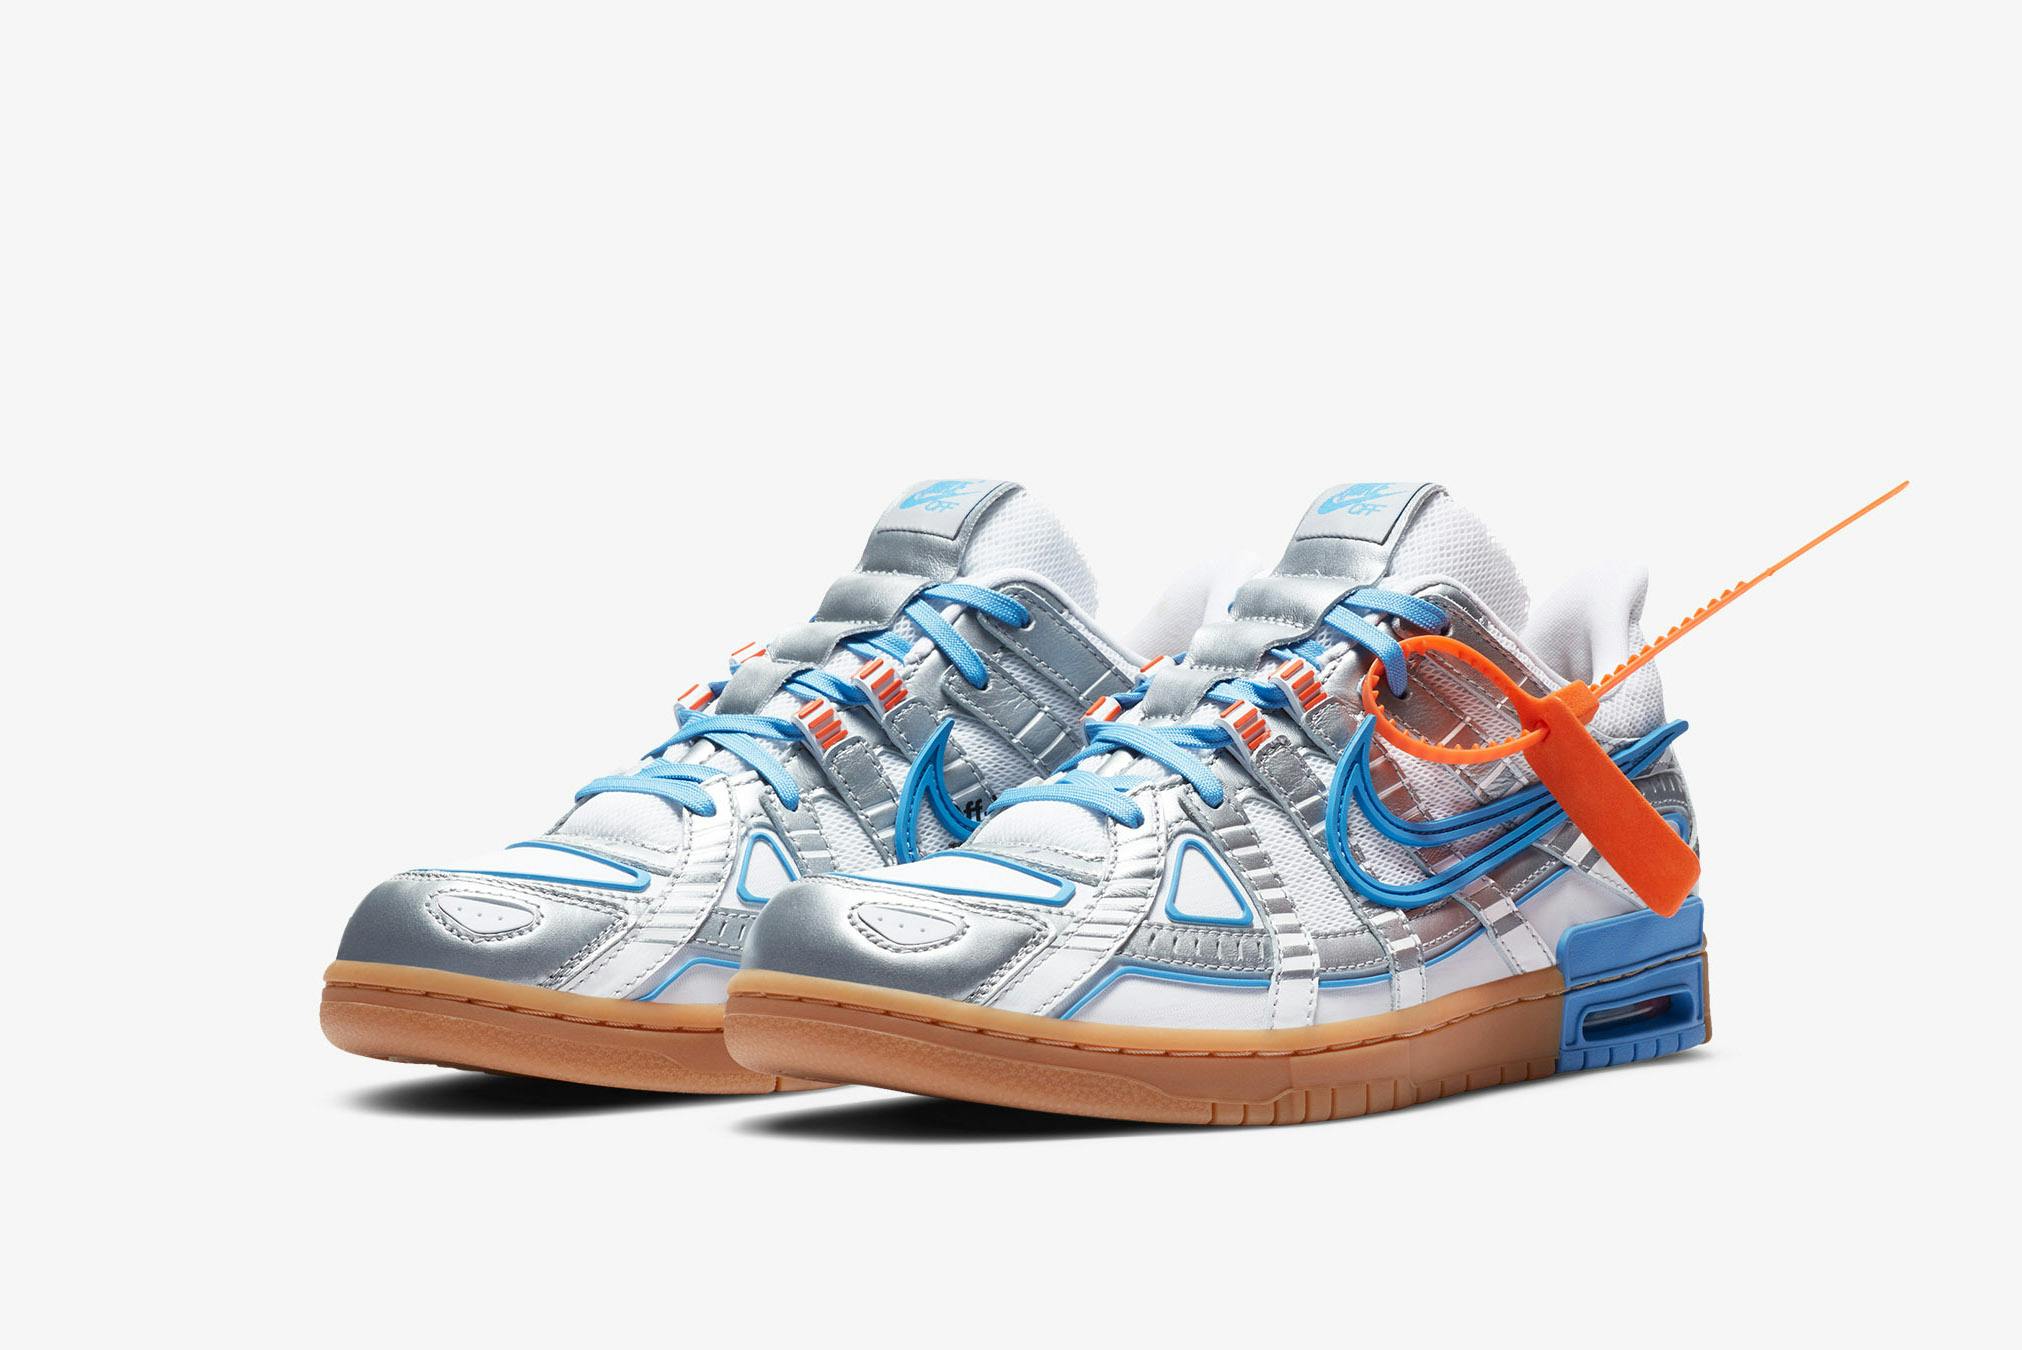 Nike x Off-White Rubber Dunk - Register Now on END. Launches | END.